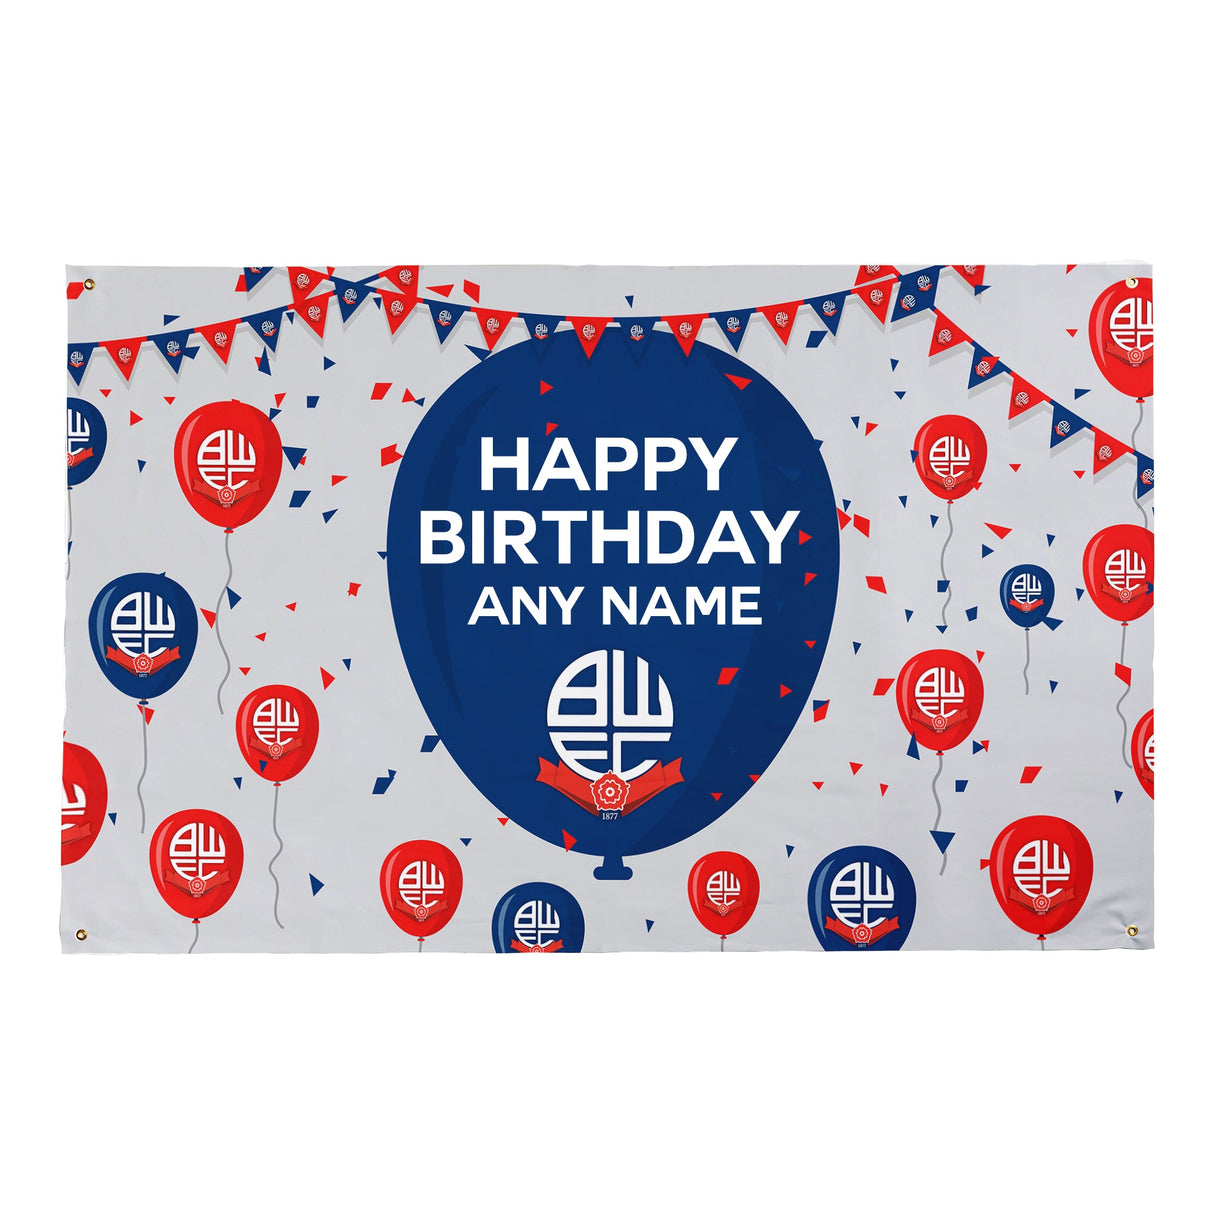 Personalised Bolton Wanderers FC Birthday 5ft x 3ft Banner